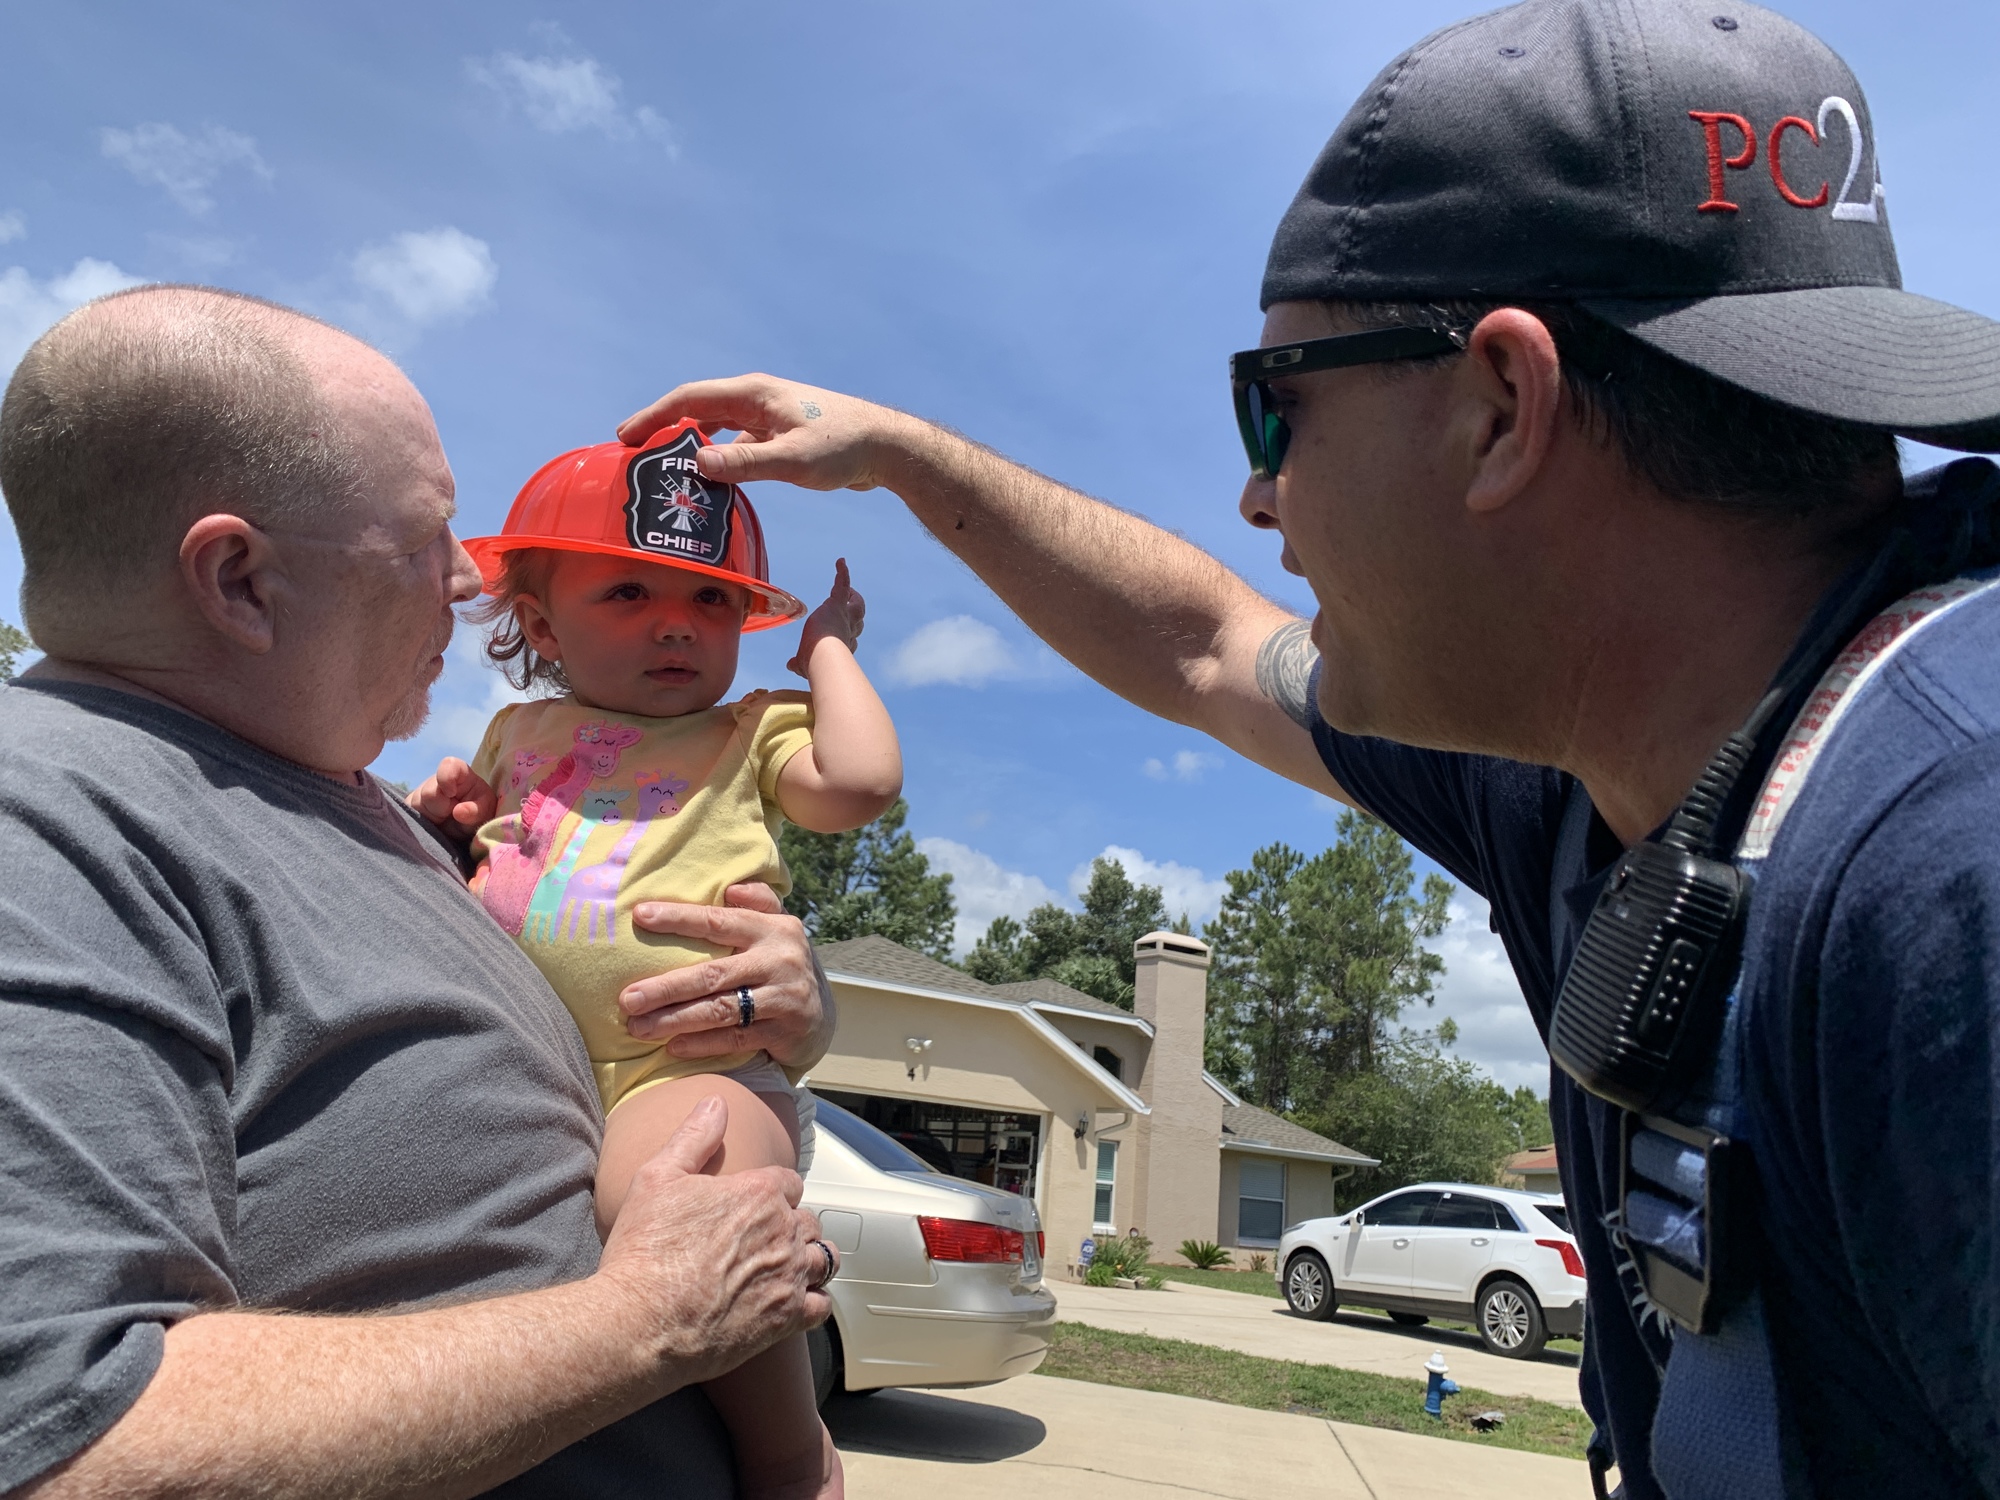 Driver Engineer Travis Greco puts a souvenir hat on the youngest Kling, 1-year-old Trinity. Trinity is held by Neil Crawford, adoptive dad of Shawn and Gordon.